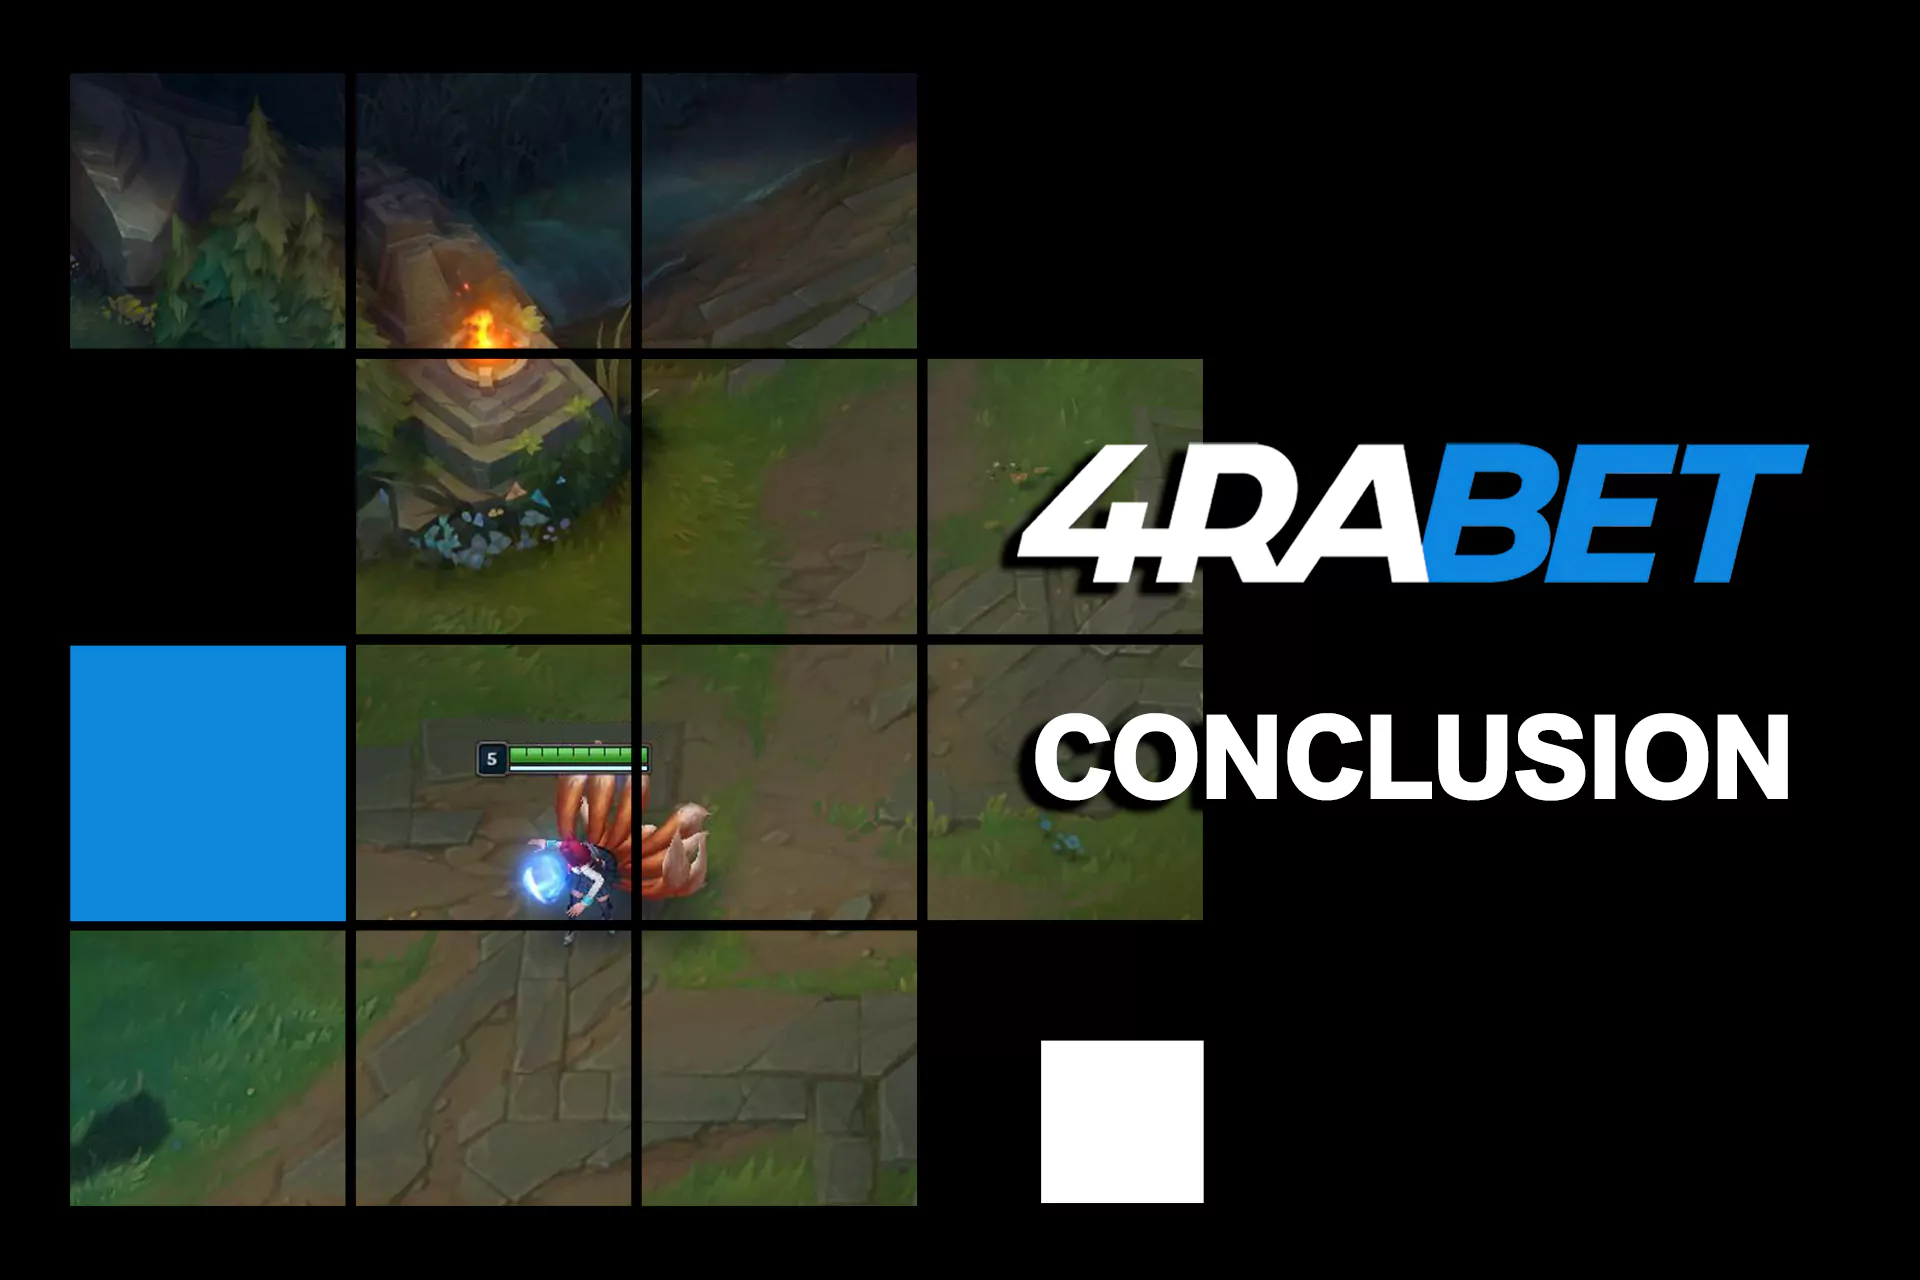 Betting on the League of Legends at 4rabet is a safe and simple operation.